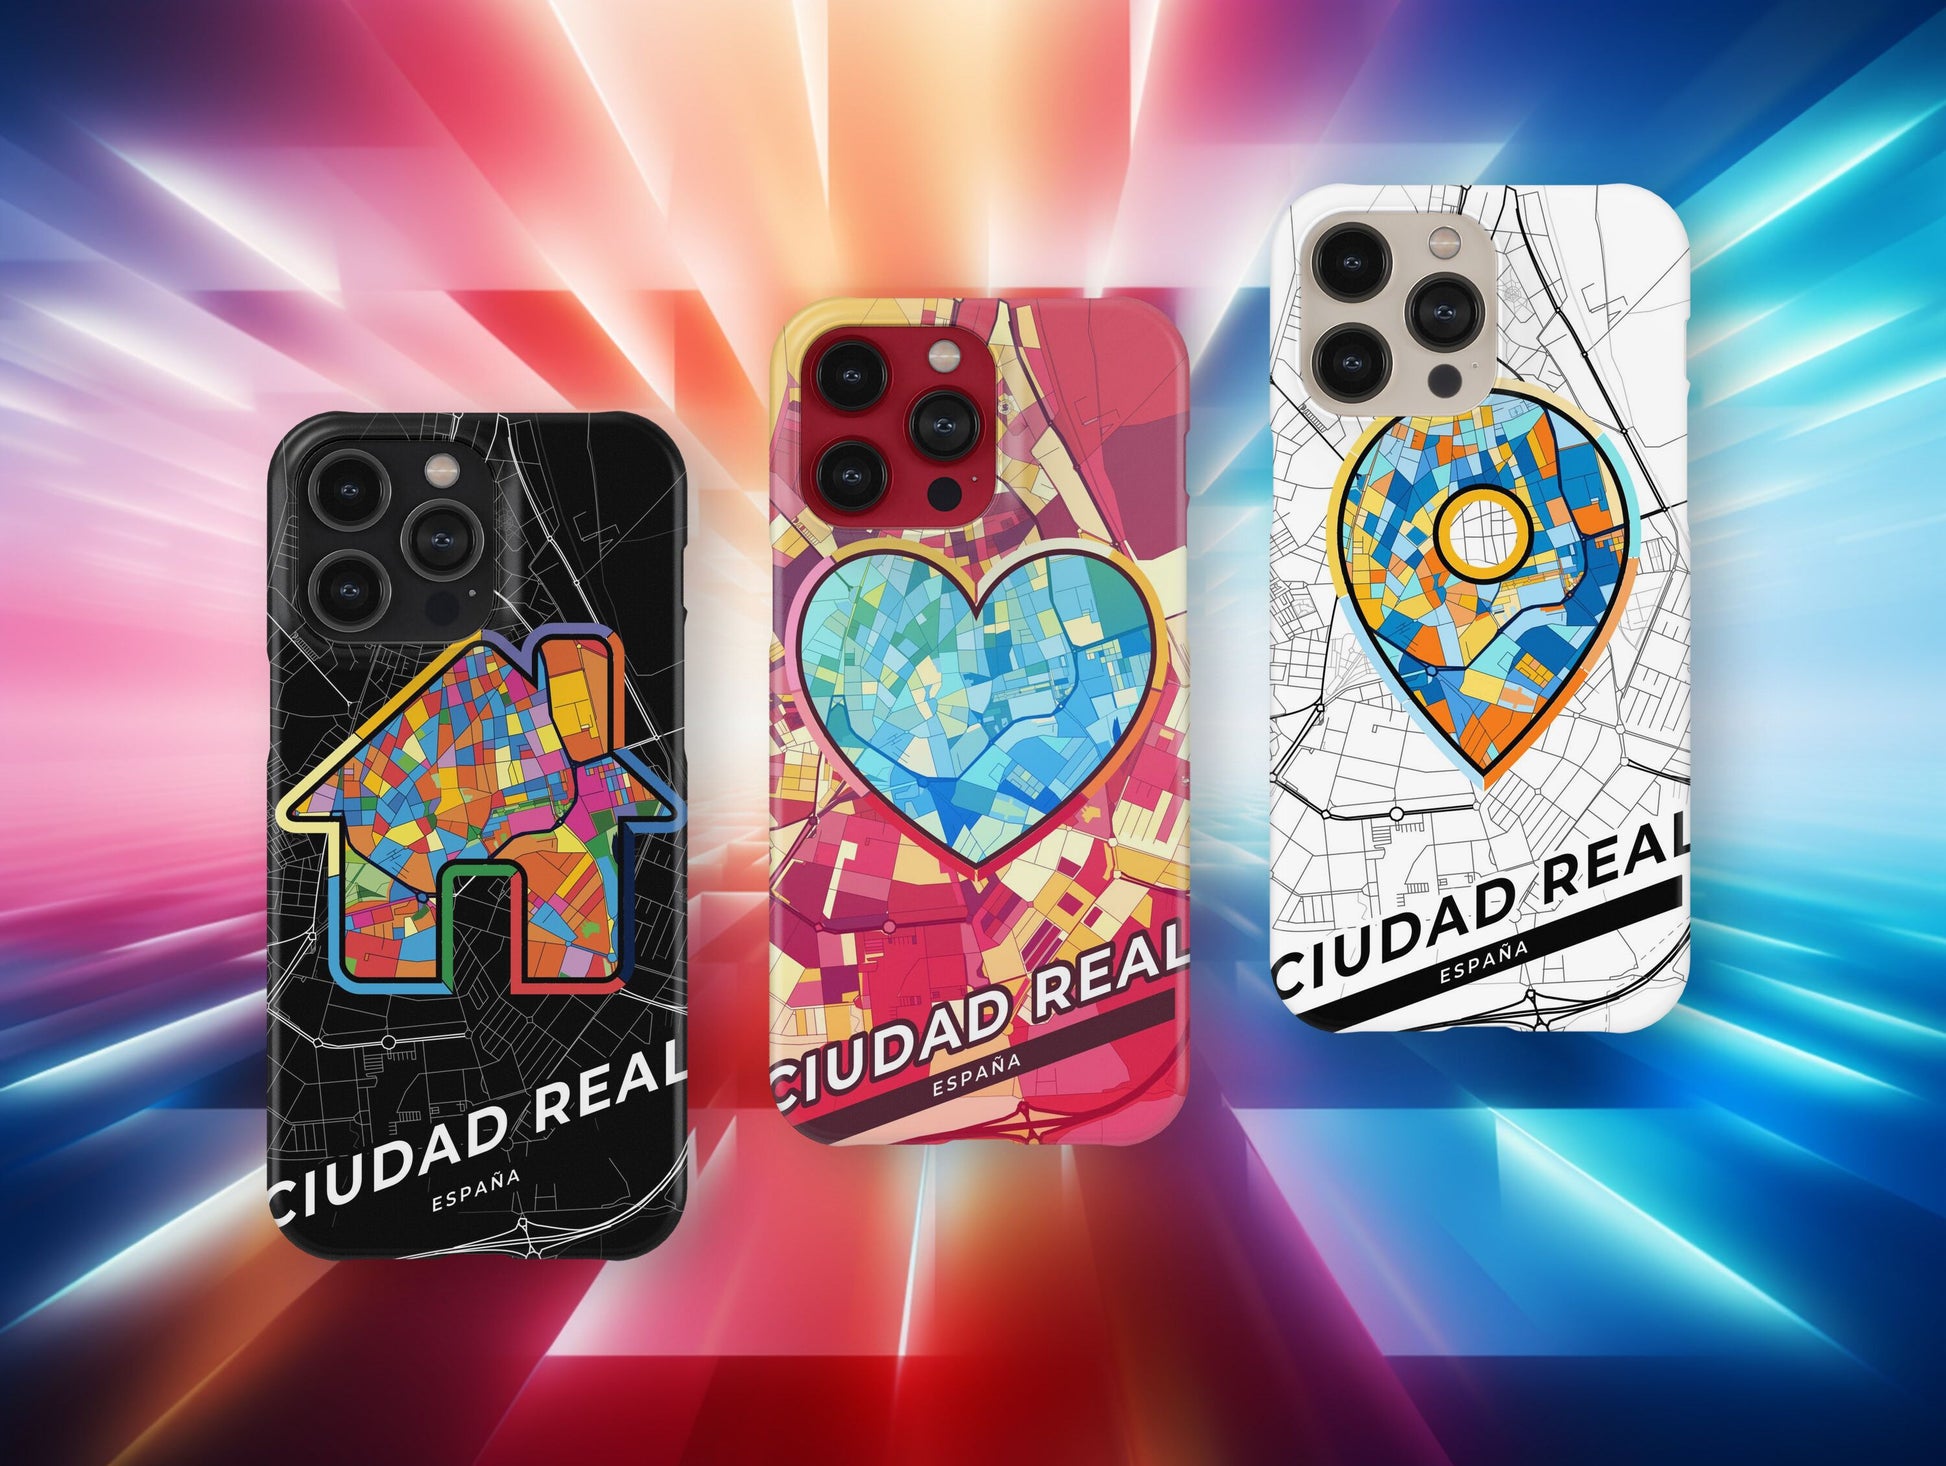 Ciudad Real Spain slim phone case with colorful icon. Birthday, wedding or housewarming gift. Couple match cases.